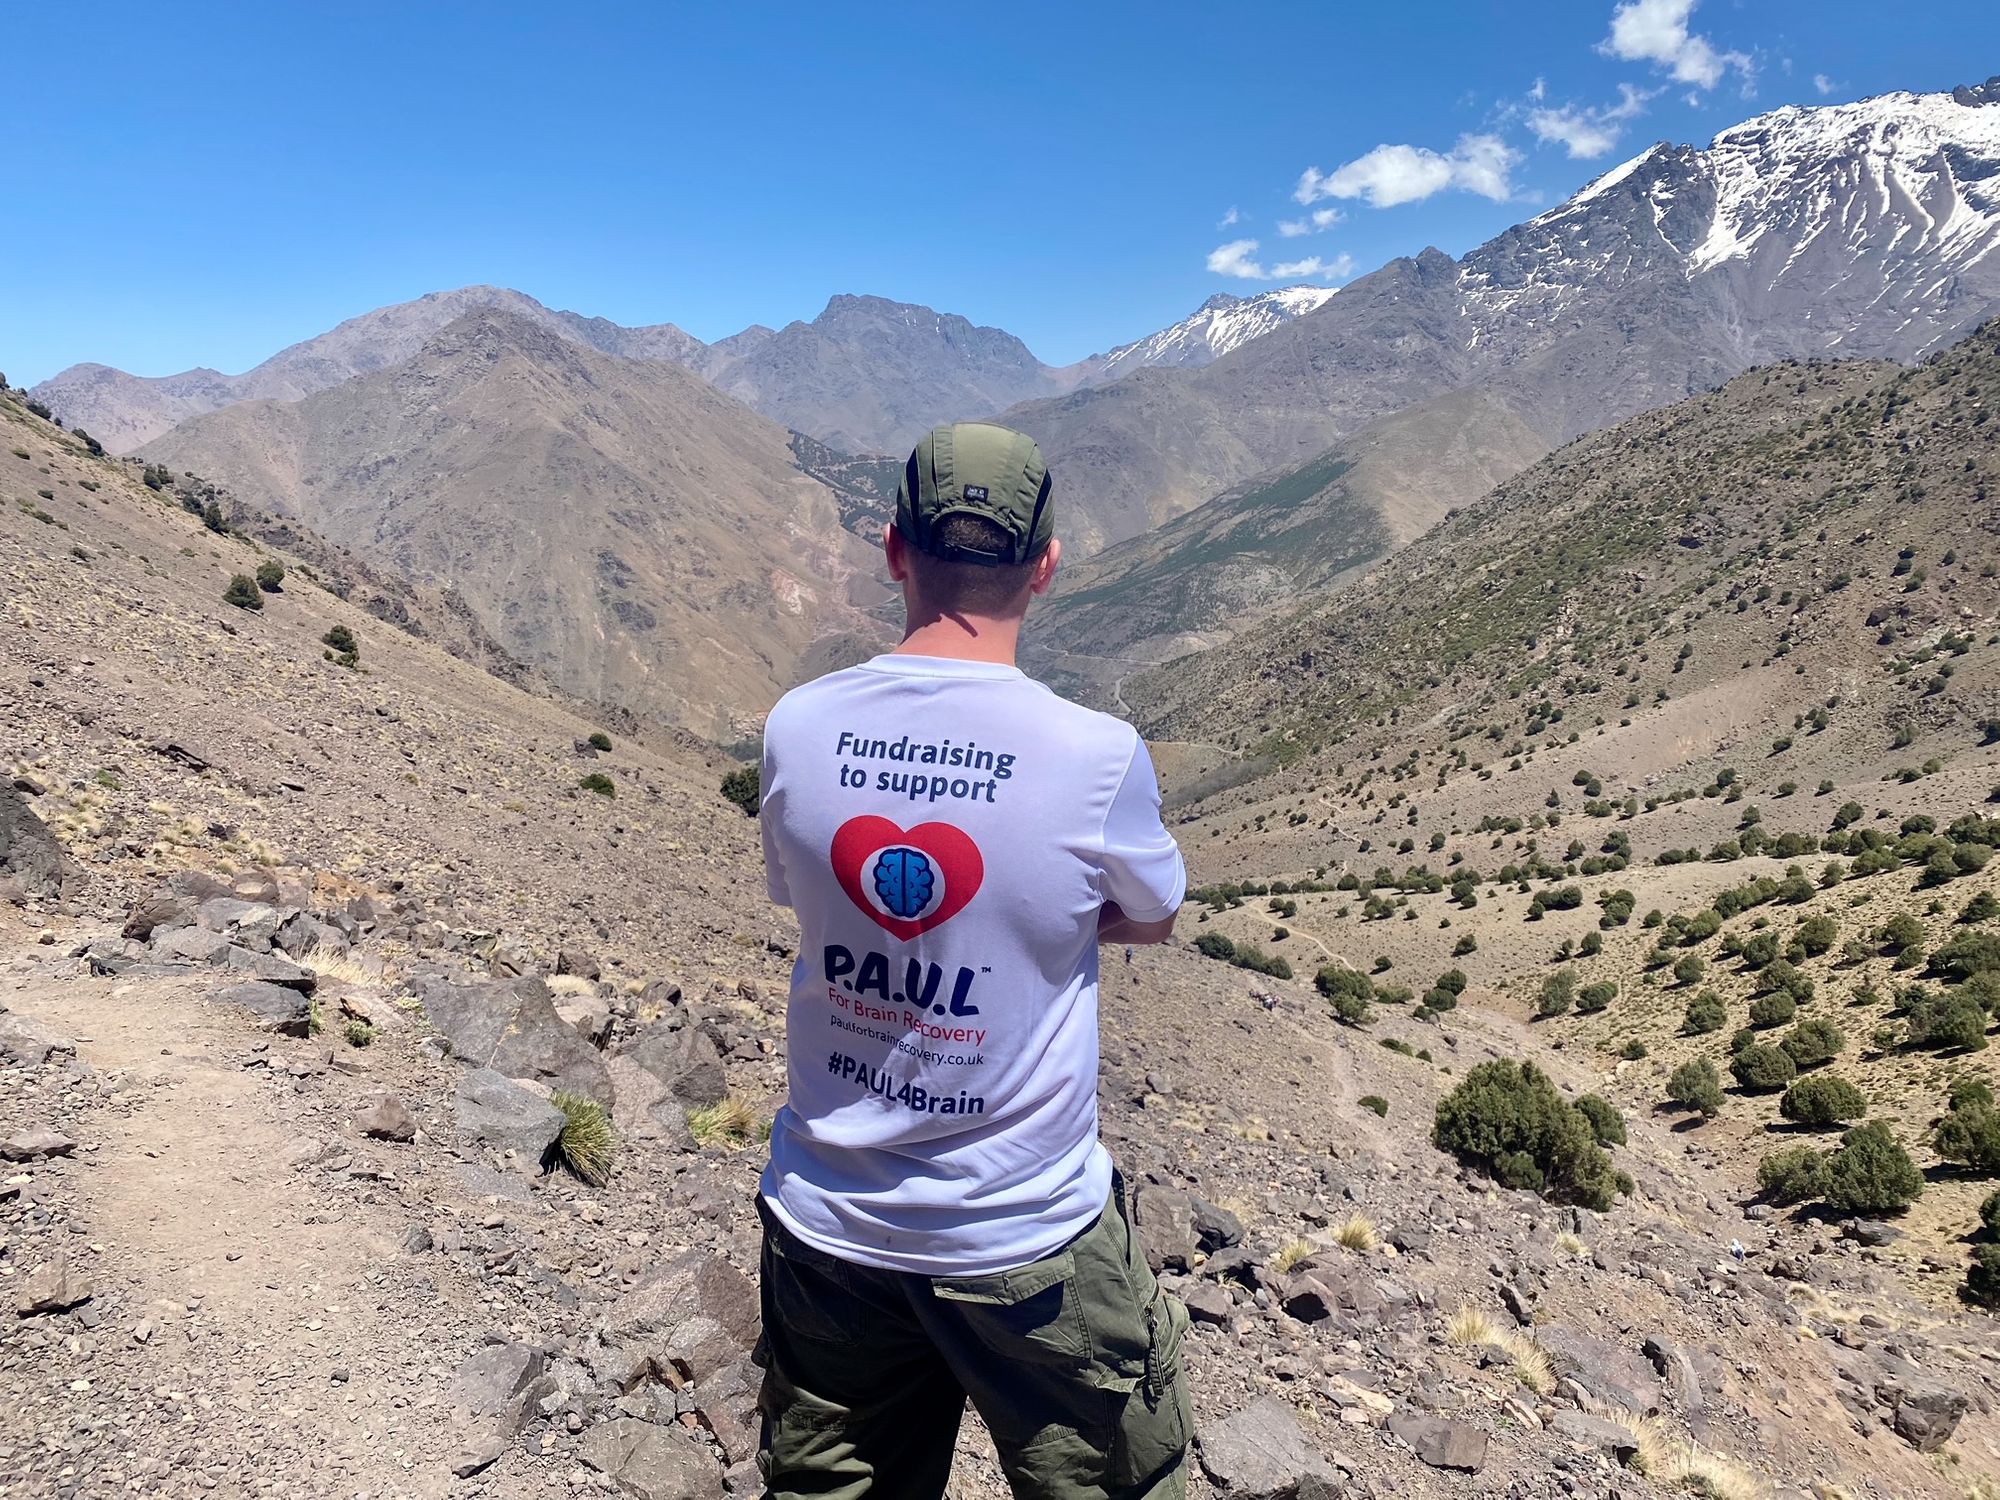 Matt in a P.A.U.L for Brain Recovery t-shirt, looking out over the Atlas Mountains